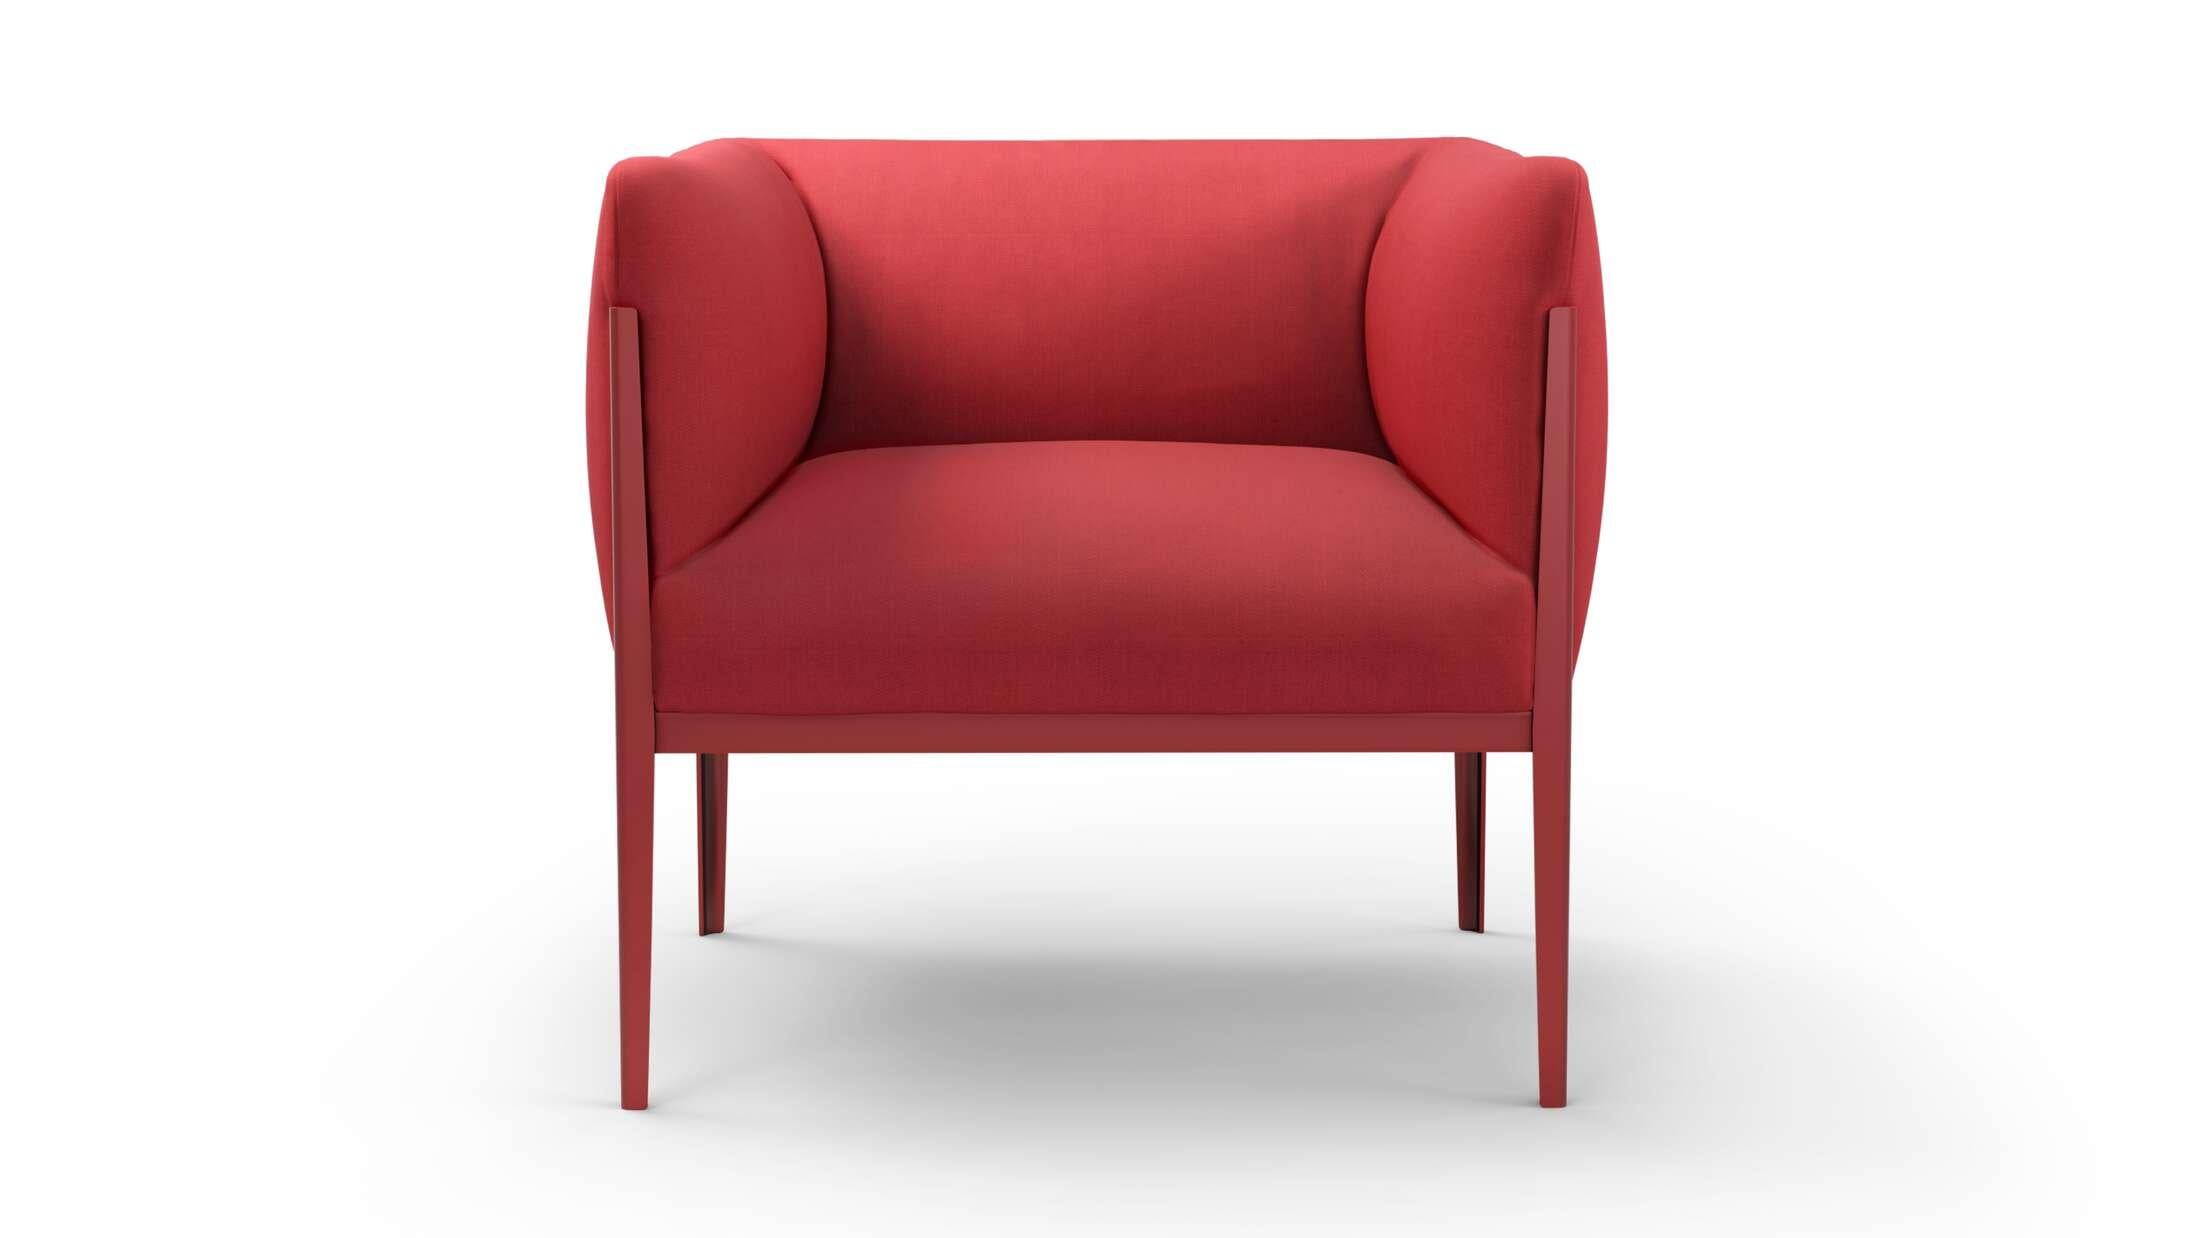 Ronan & Erwan Bourroullec 'Cotone' Armchair for Cassina, Italy, new In New Condition For Sale In Berlin, DE